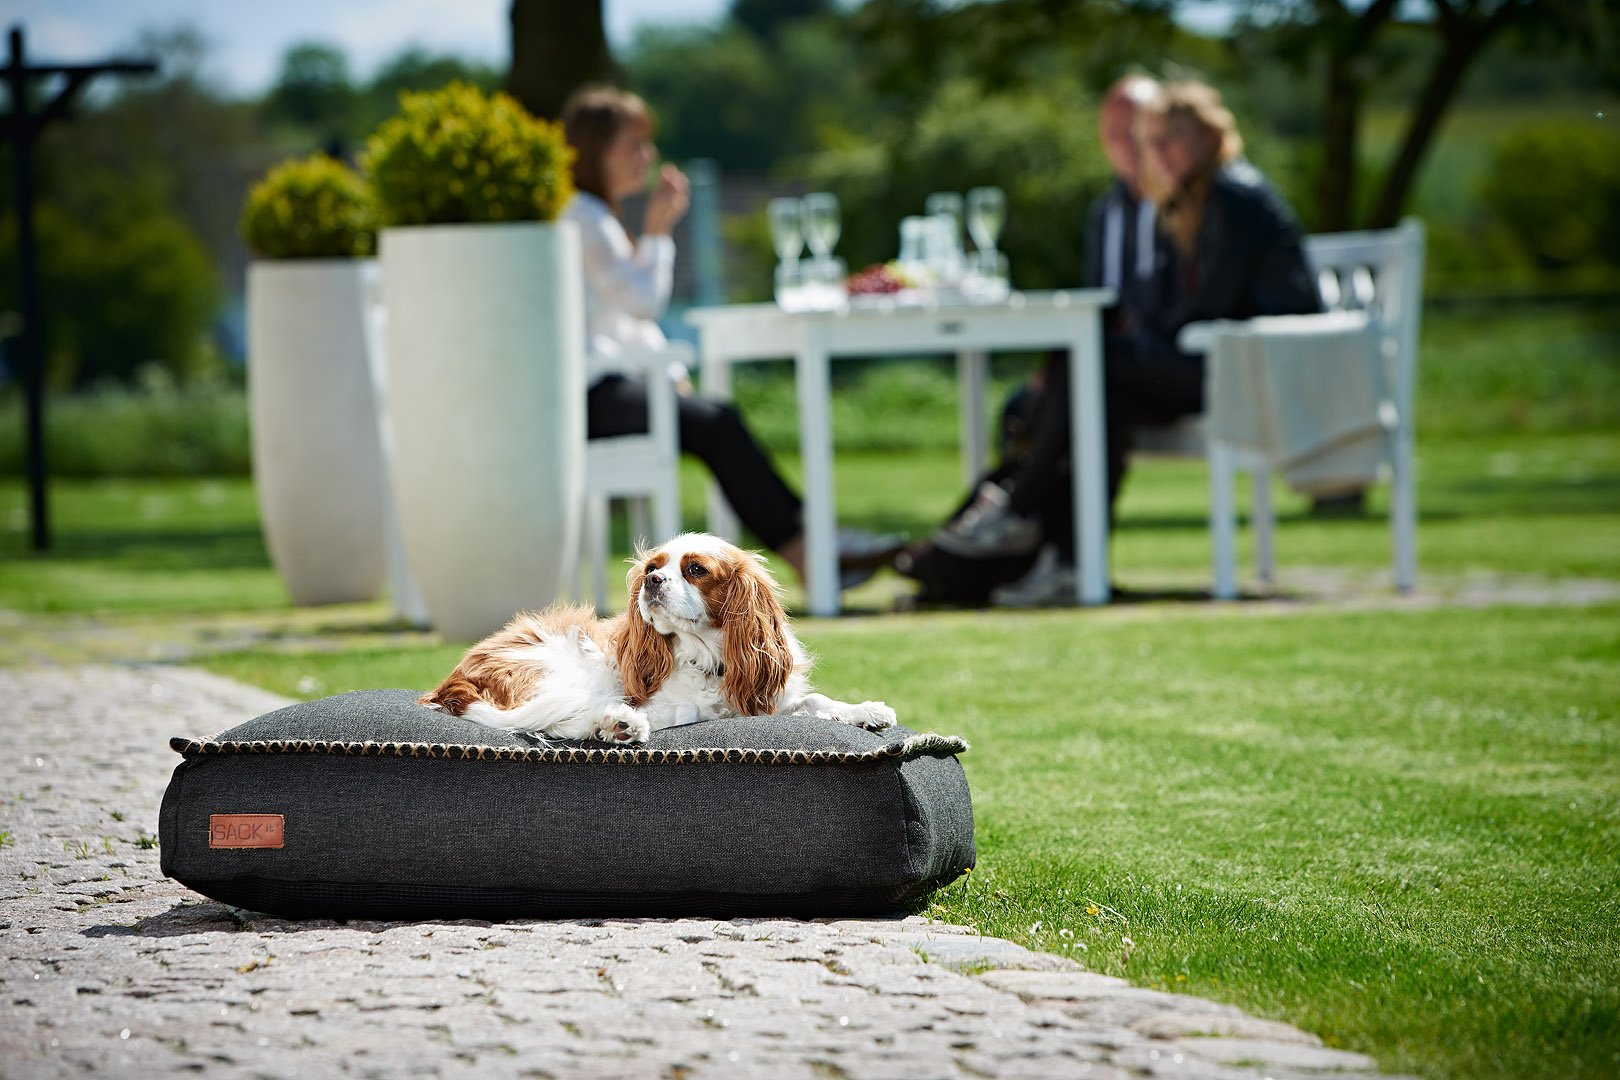 BEON.COM.AU Give your pet luxury inside and outside! Give your pet and your home exclusive and luxurious Danish design. The stylish DOGit Cobana is made from the durable and beautiful Cobana fabric, which is both water resistant and fast to light. Now your pet doesn’t need to lay on the ground when you enjoy... Sackit Australia at BEON.COM.AU